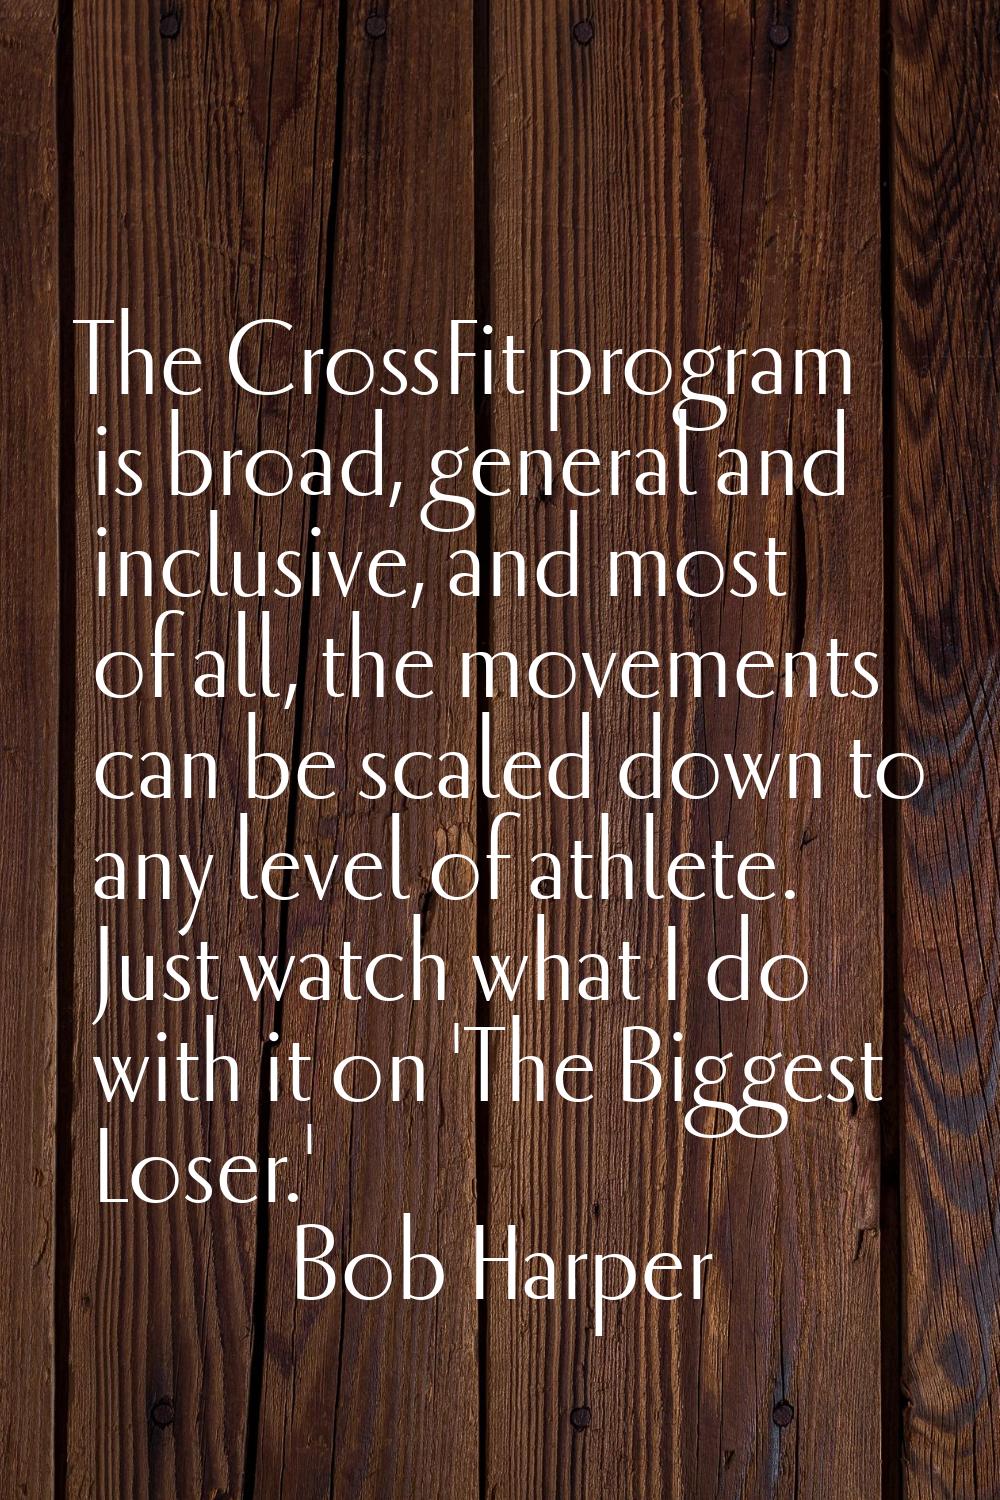 The CrossFit program is broad, general and inclusive, and most of all, the movements can be scaled 